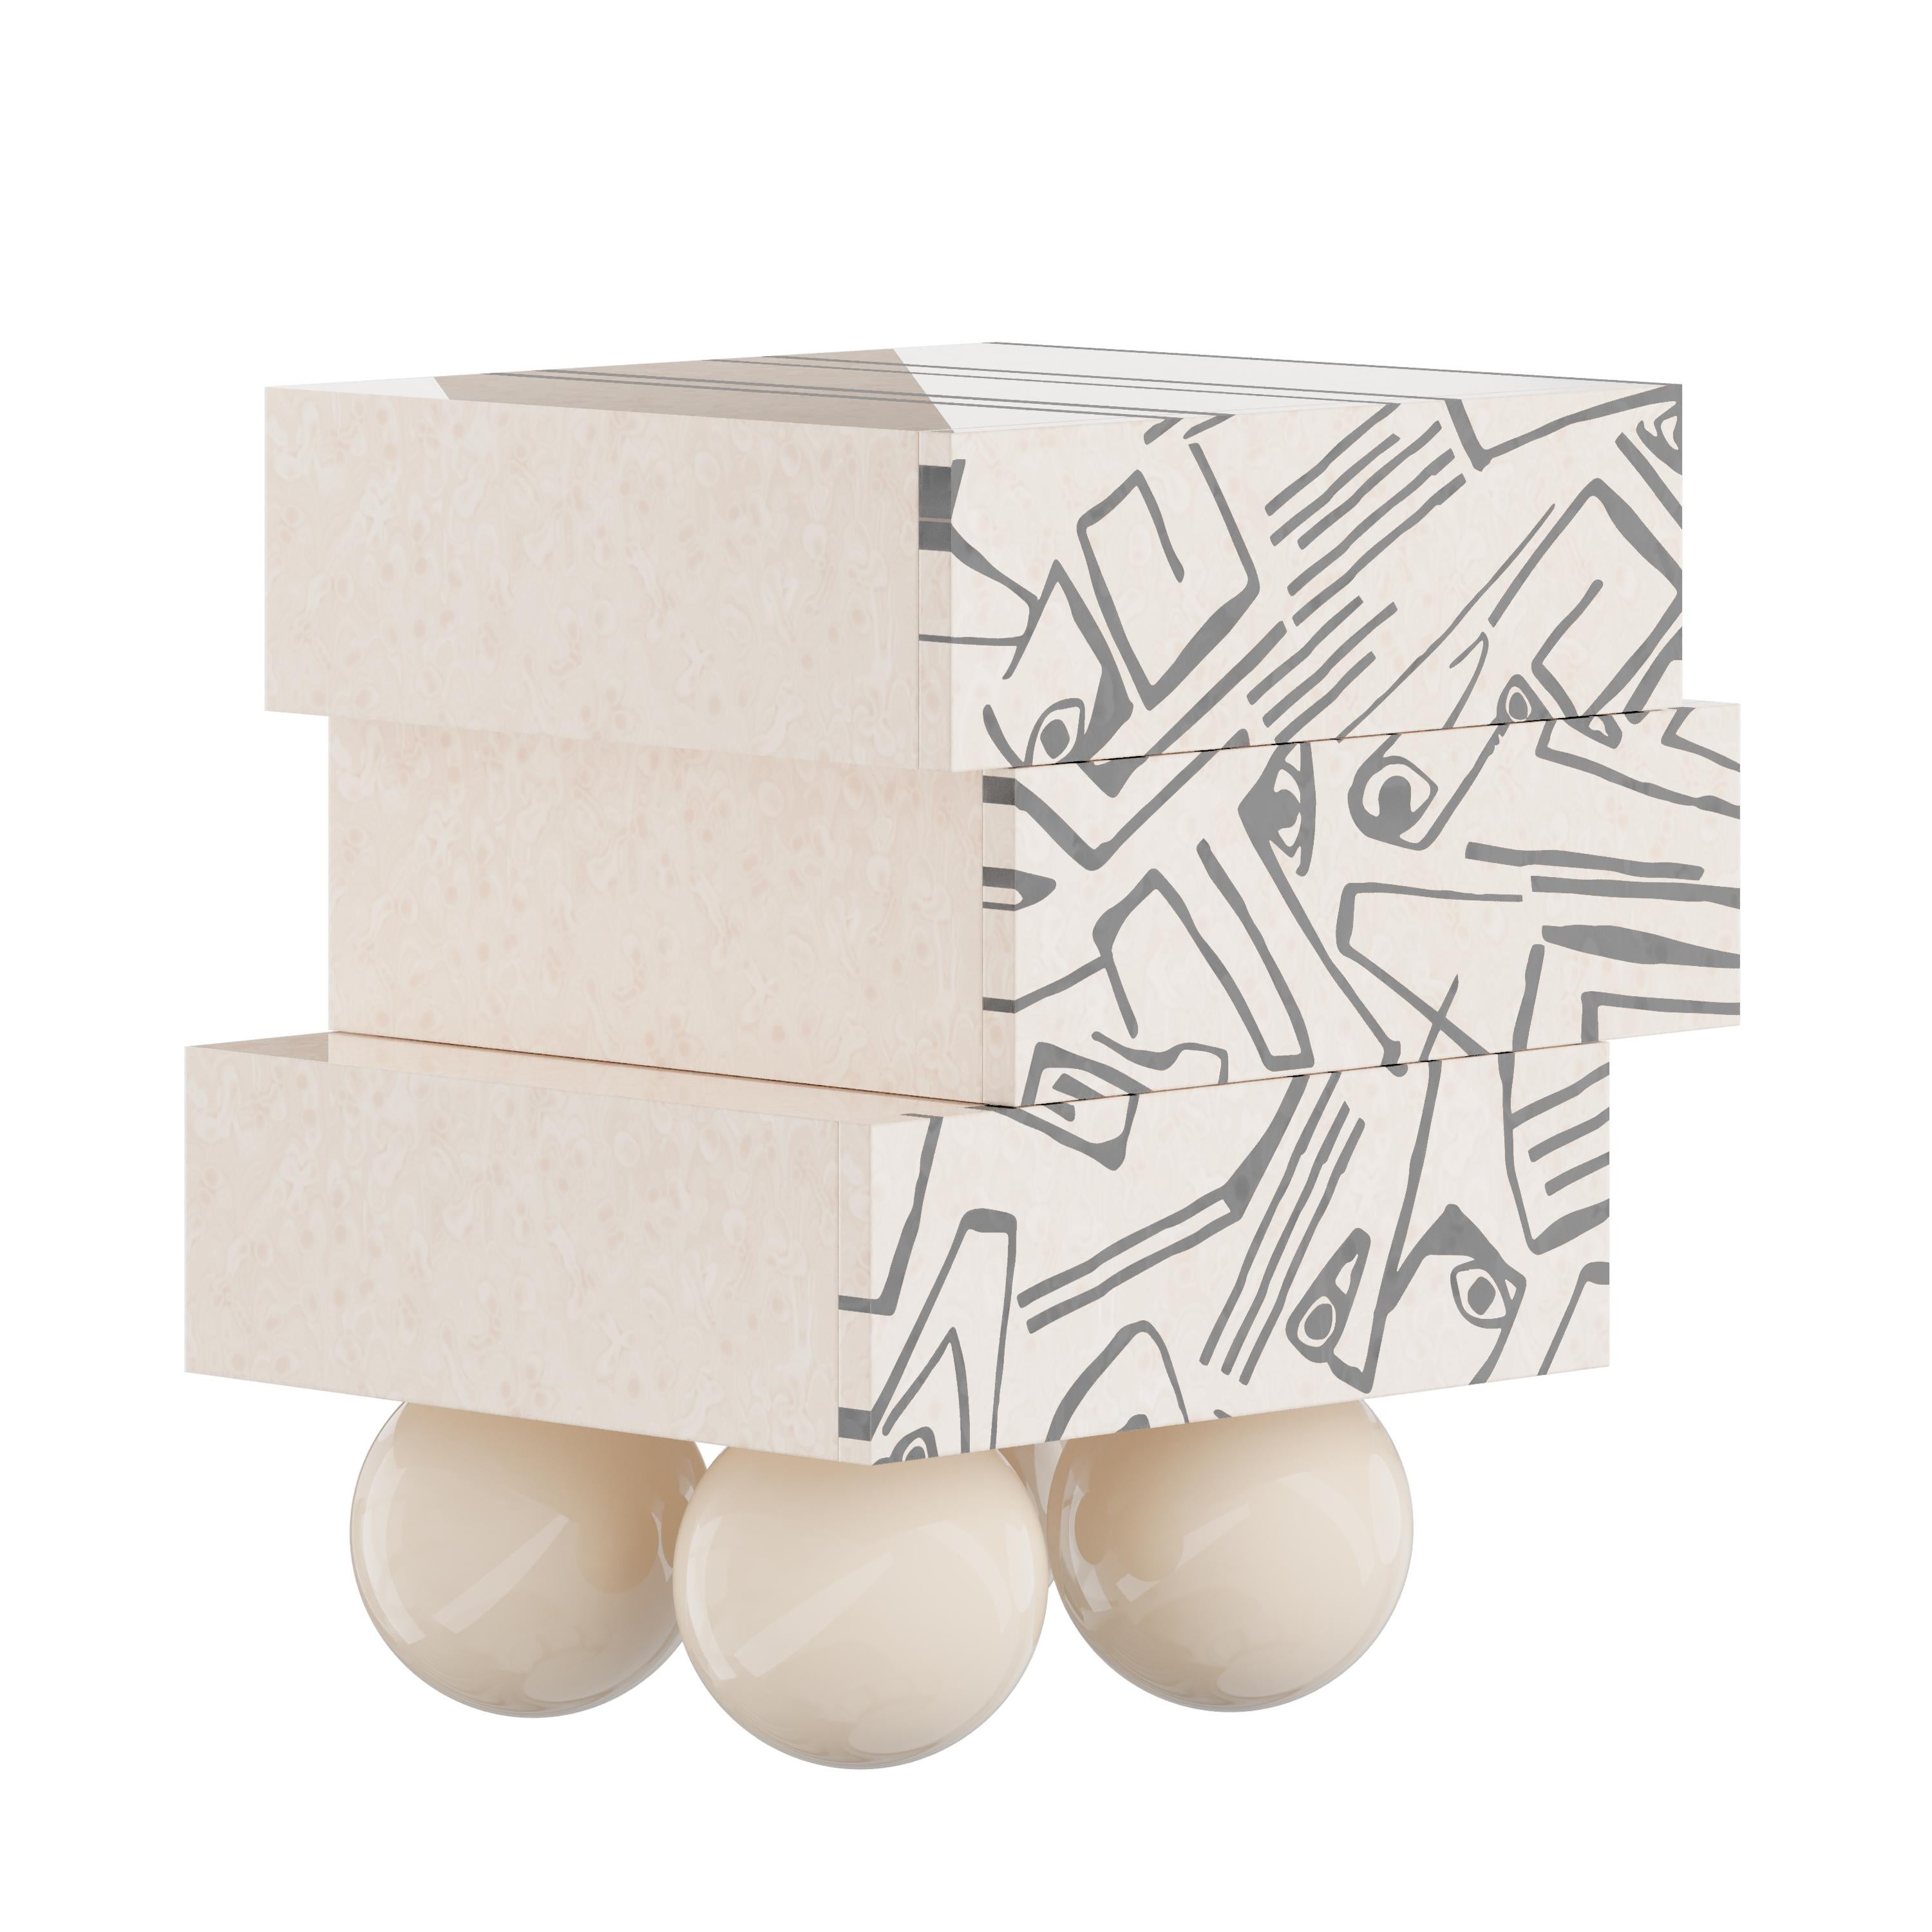 Malaga bedside table is the perfect cubist bedside table for a minimal bedroom project. Its dynamic silhouette features three drawers resting on four legs of wooden spheres. The striking geometric design of this modern nightstand allows it to become